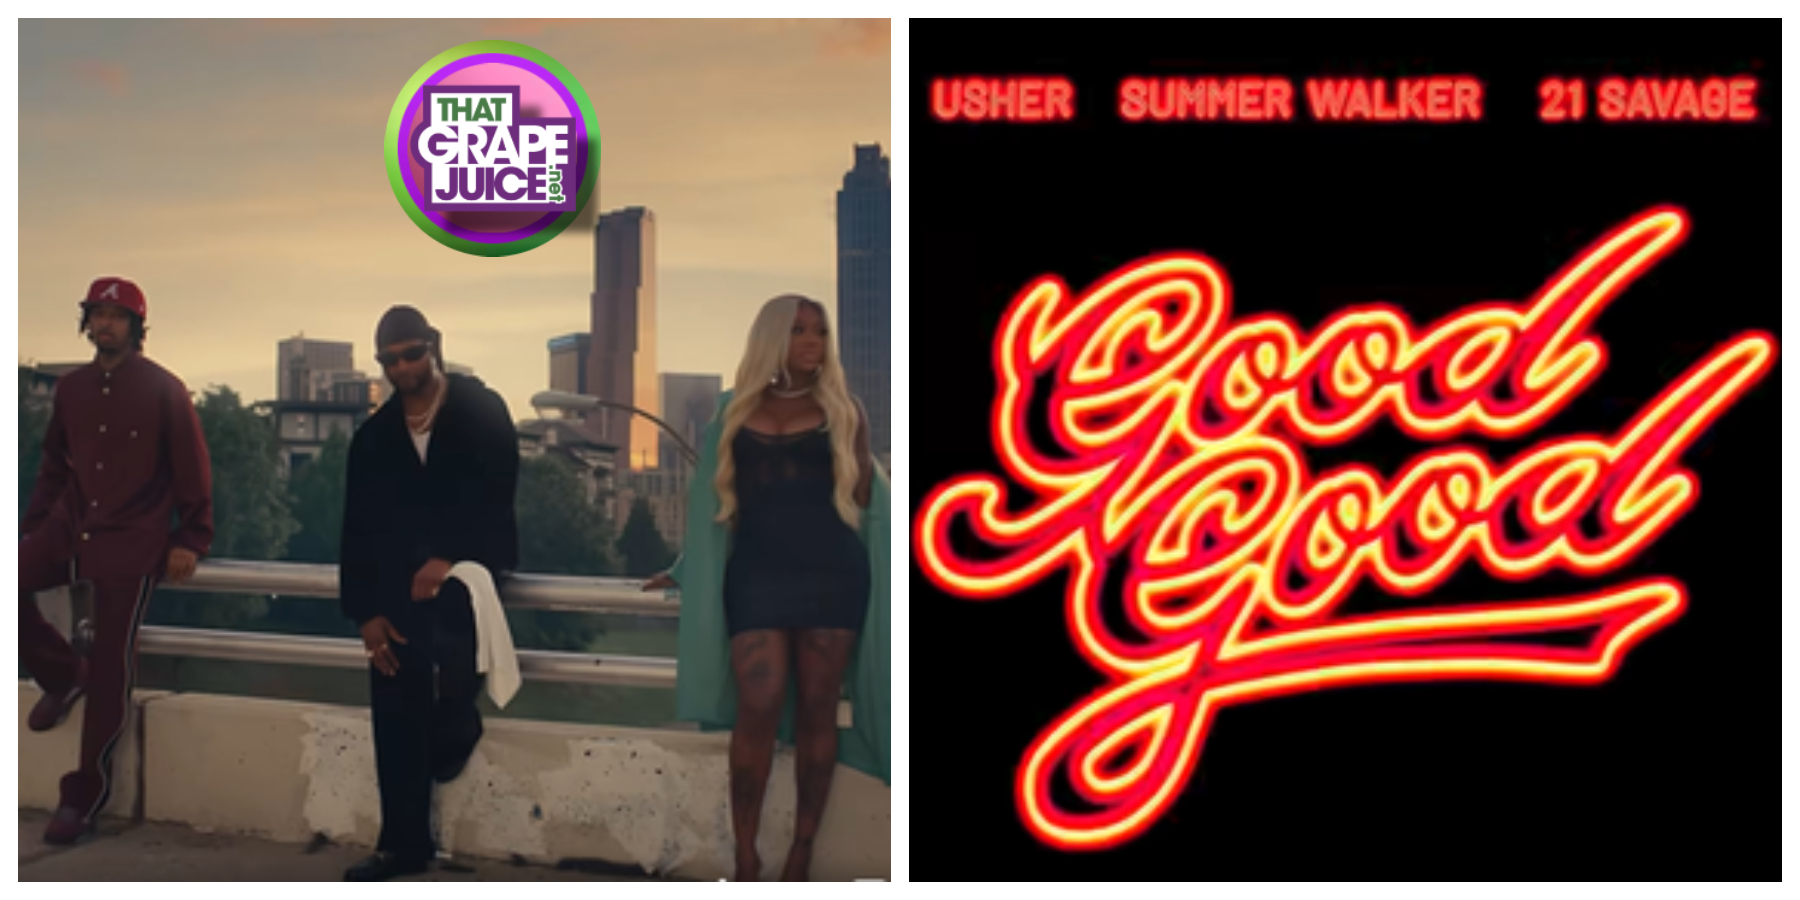 Usher Teases Official ‘Good Good’ Music Video with 21 Savage & Summer Walker [Watch]